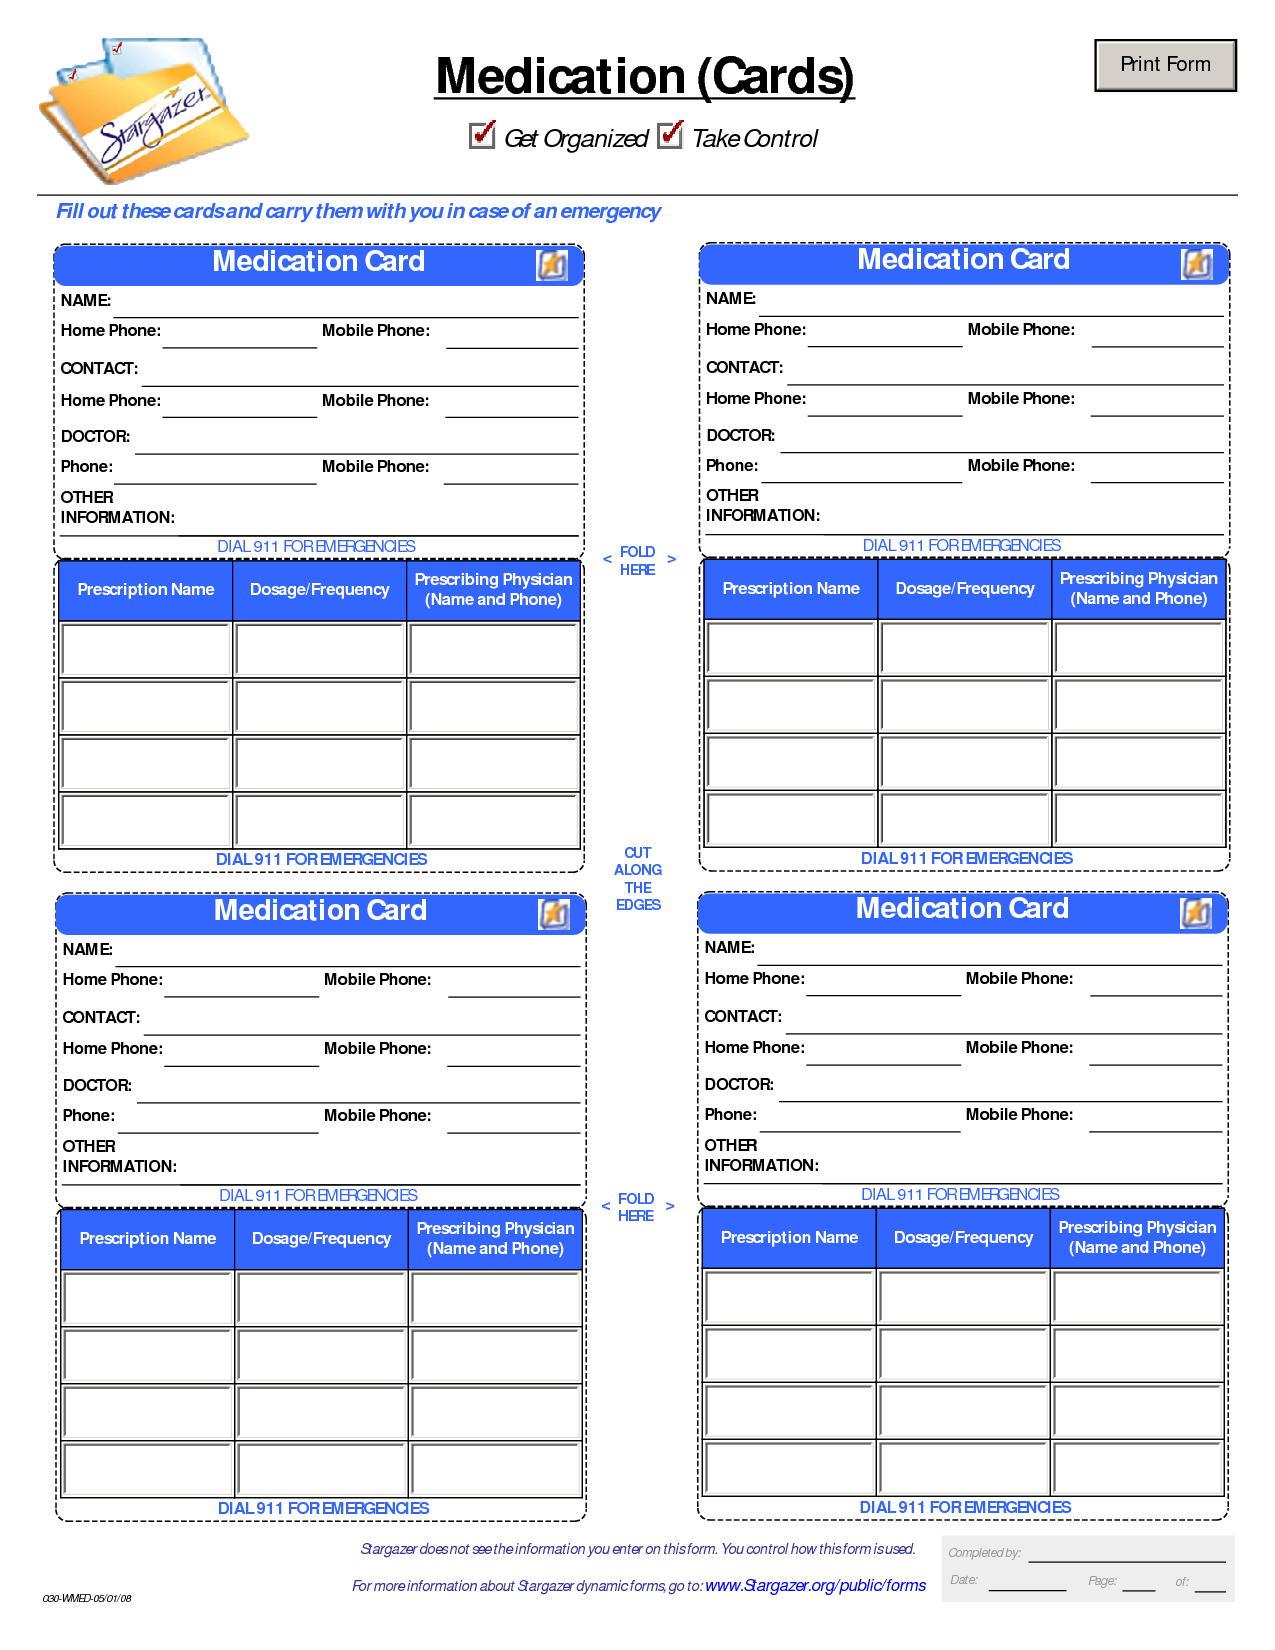 Patient Medication Card Template | Medication List, Medical Intended For Med Cards Template